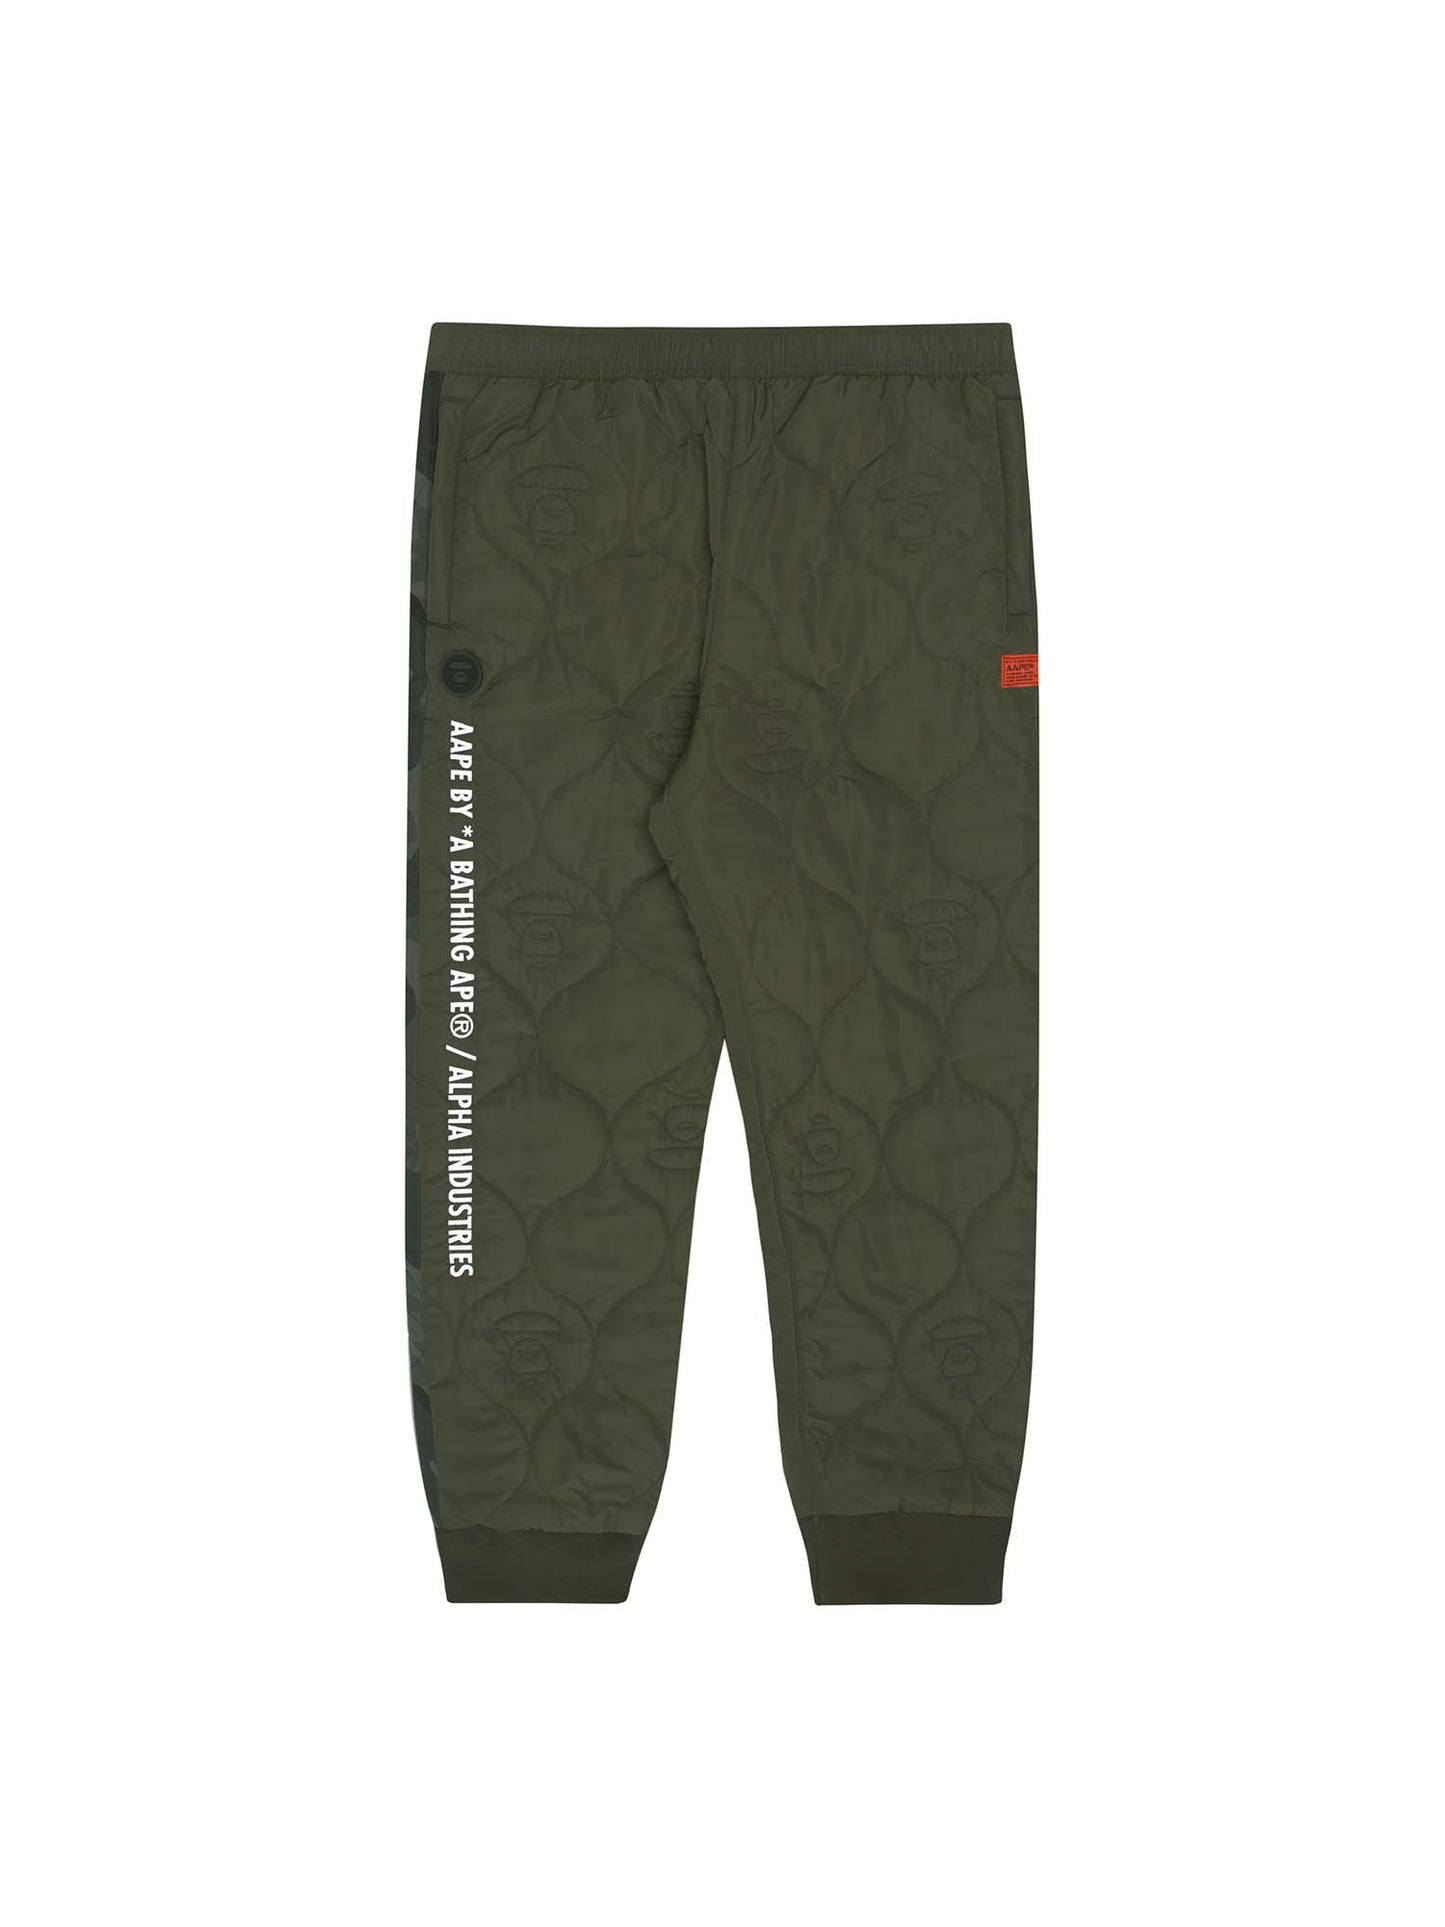 AAPE X ALPHA QUILTED PANT BOTTOM Alpha Industries, Inc. OLIVE L 